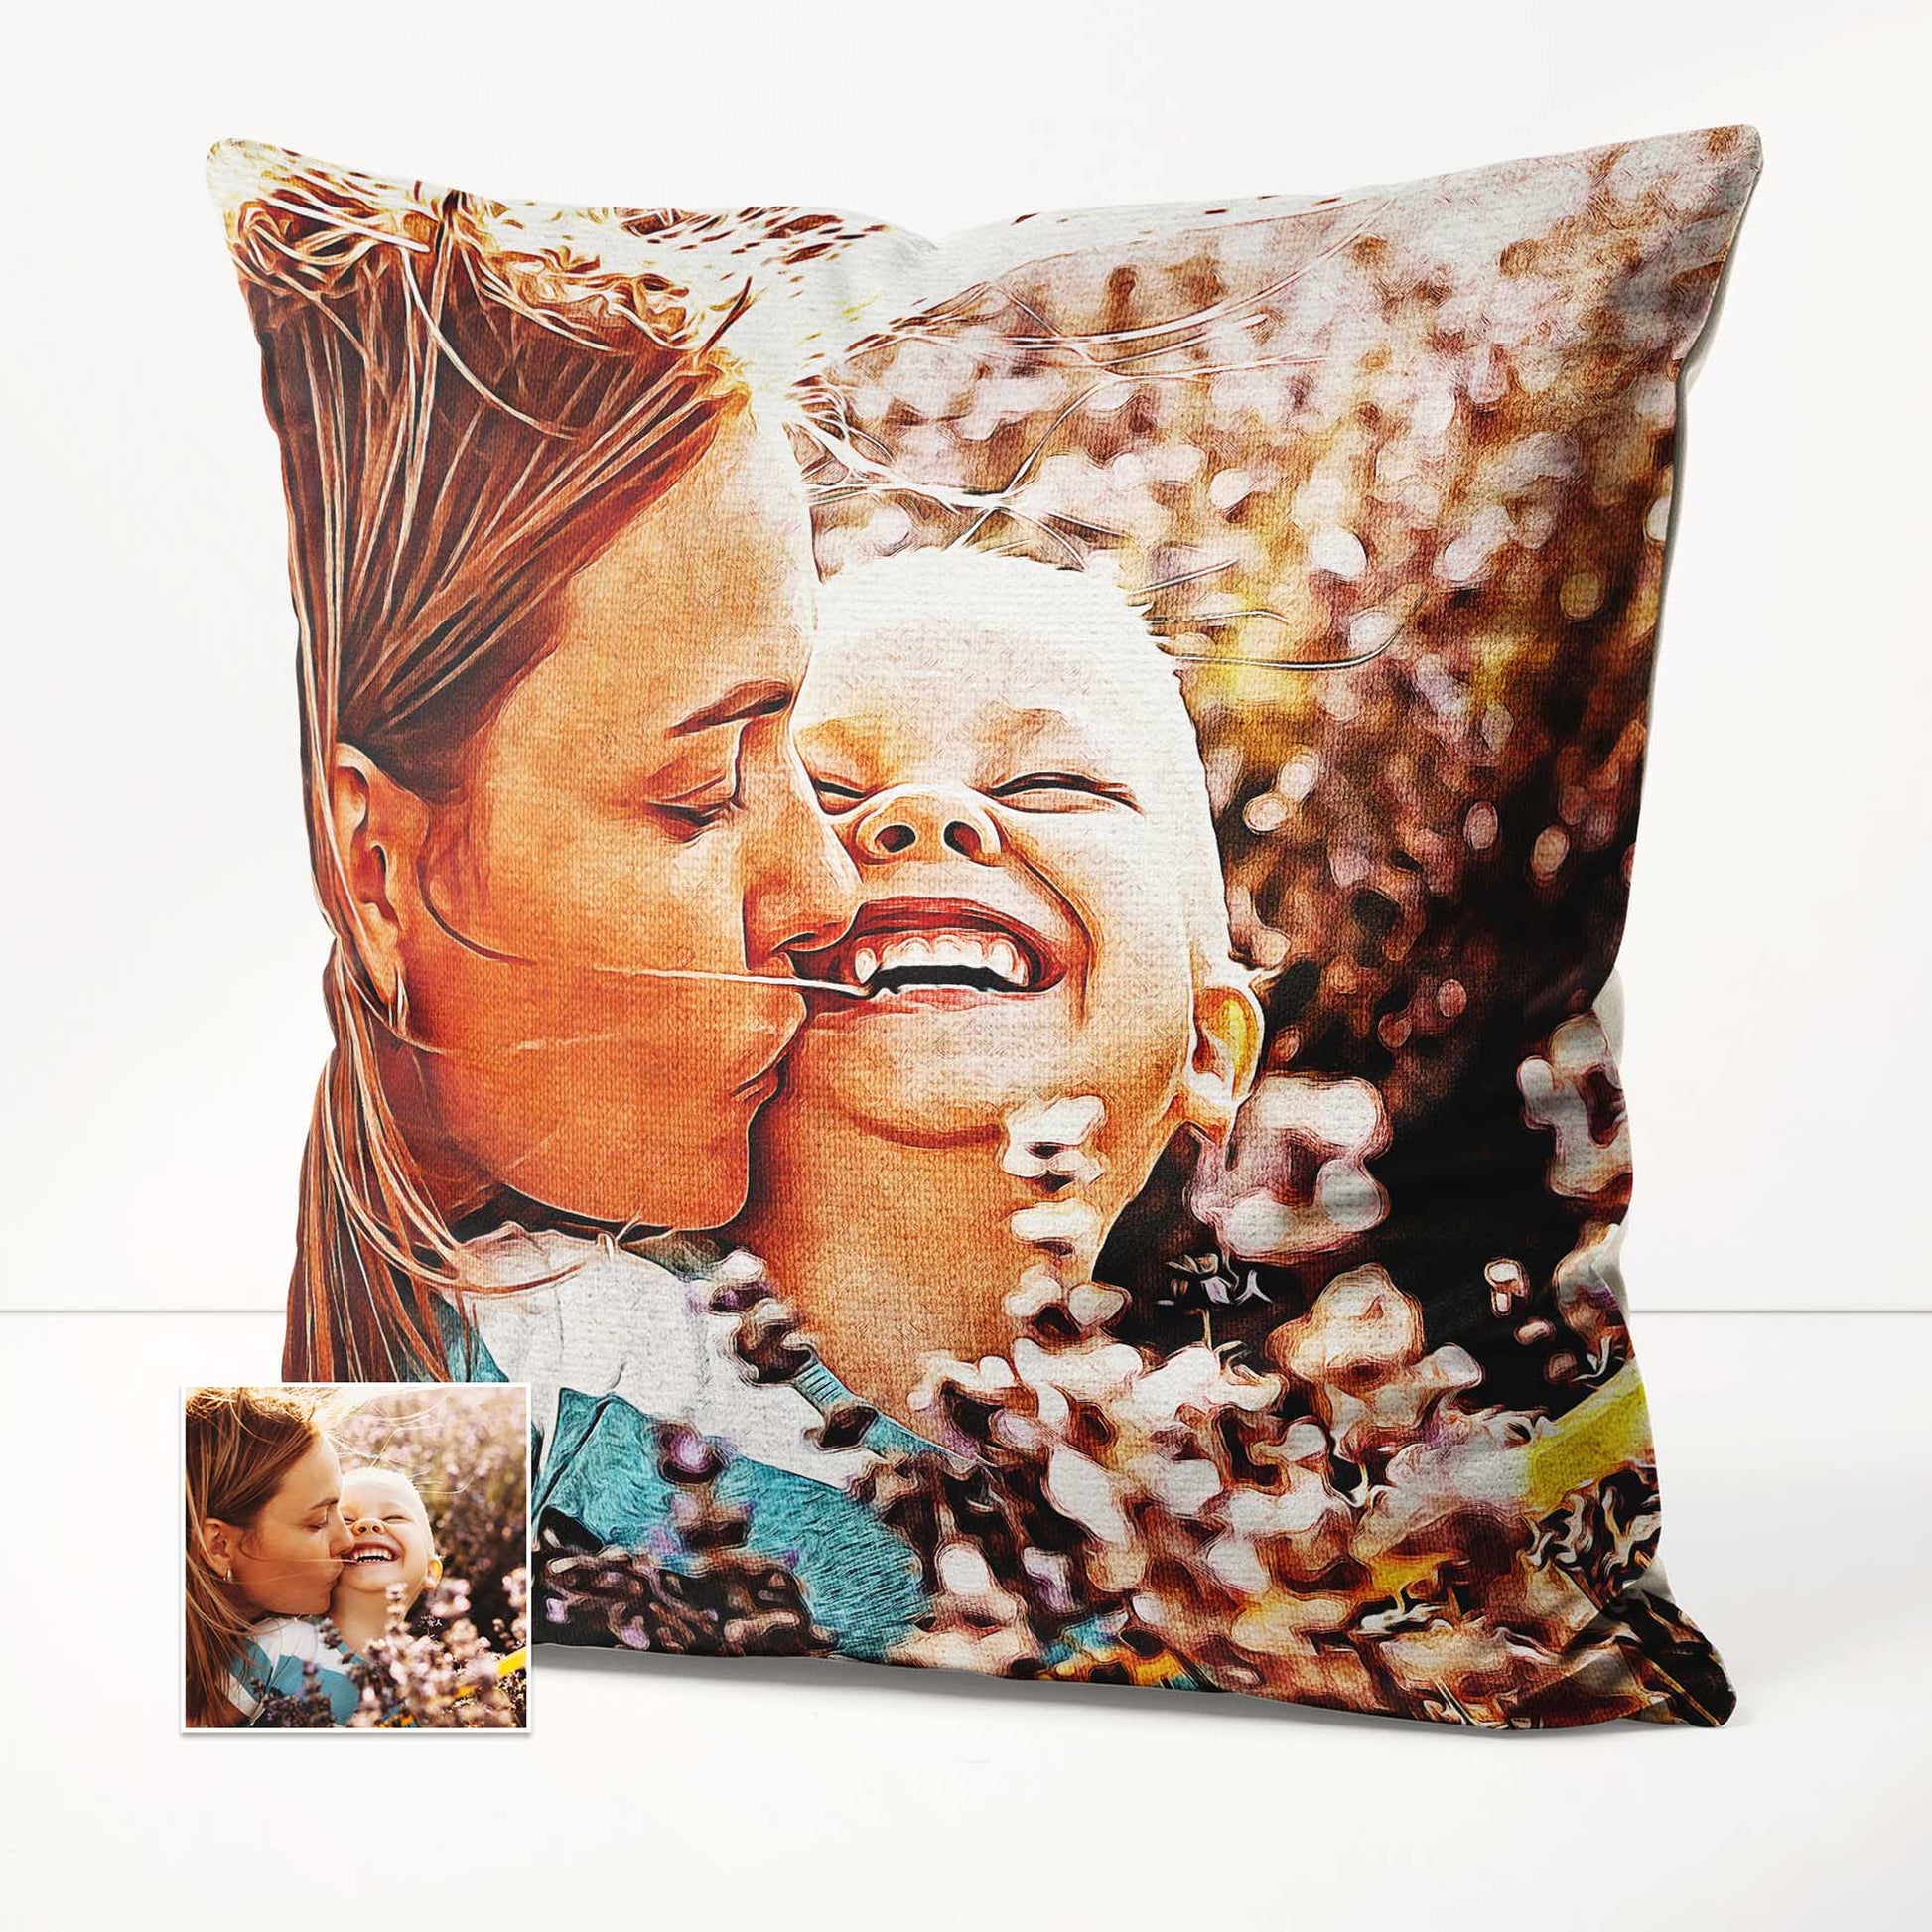 Transform your home into an art gallery with the Personalised Original Oil Painting Cushion. Crafted with meticulous care, this luxurious cushion features a painting created from your photo, making it a truly unique and handmade 